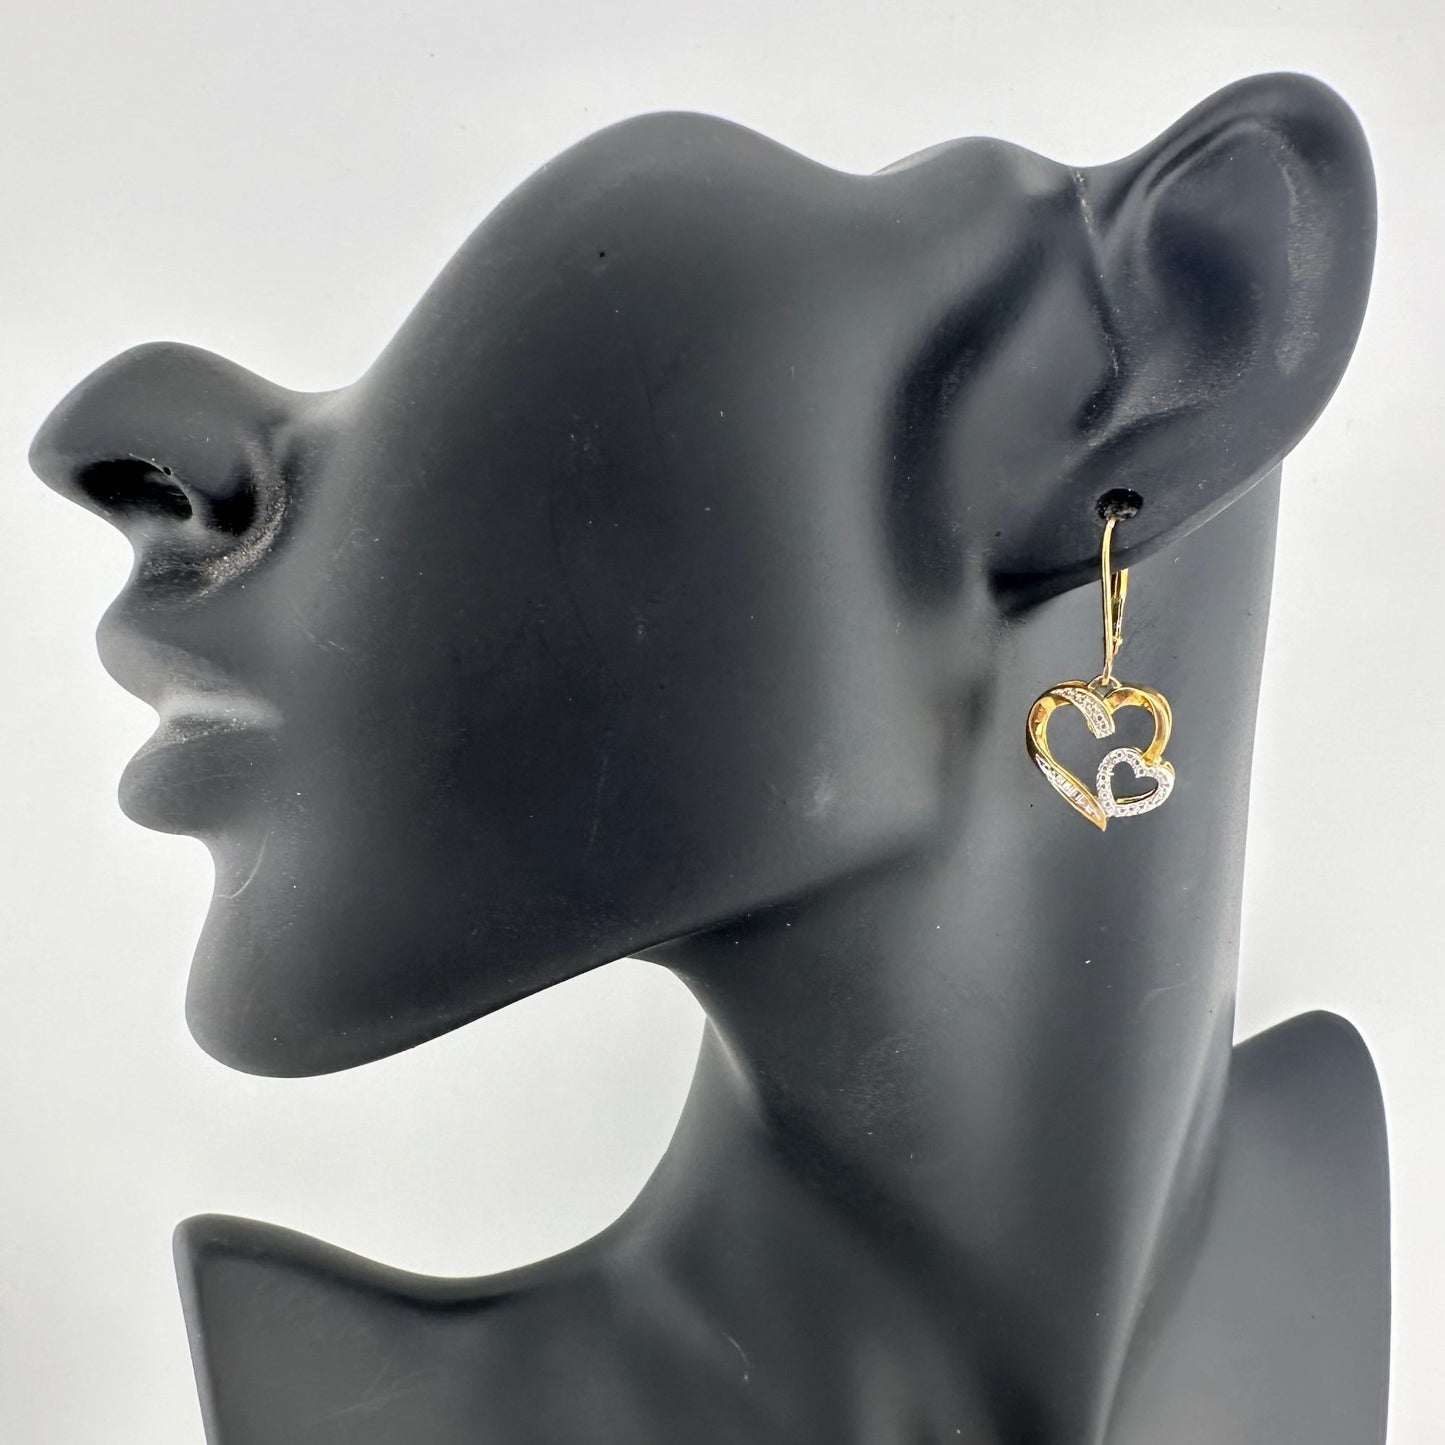 Share the Love! - 14kt Gold Plated Double Heart Earrings with Diamond Accents